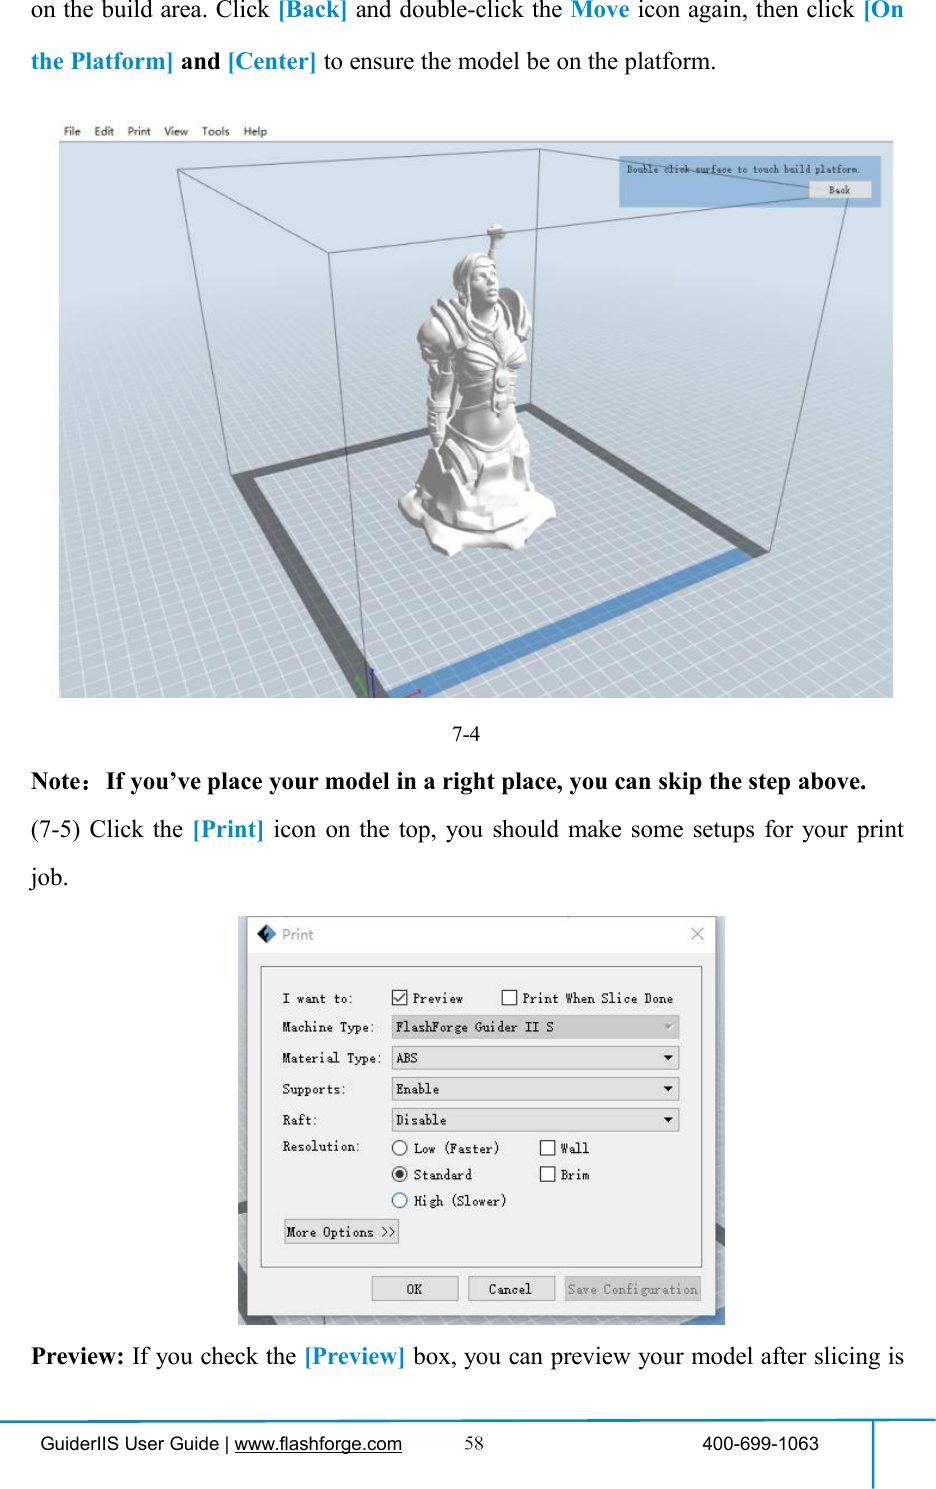 GuiderIIS User Guide | www.flashforge.com 400-699-1063on the build area. Click [Back] and double-click the Move icon again, then click [Onthe Platform] and [Center] to ensure the model be on the platform.7-4Note：If you’ve place your model in a right place, you can skip the step above.(7-5) Click the [Print] icon on the top, you should make some setups for your printjob.Preview: If you check the [Preview] box, you can preview your model after slicing is